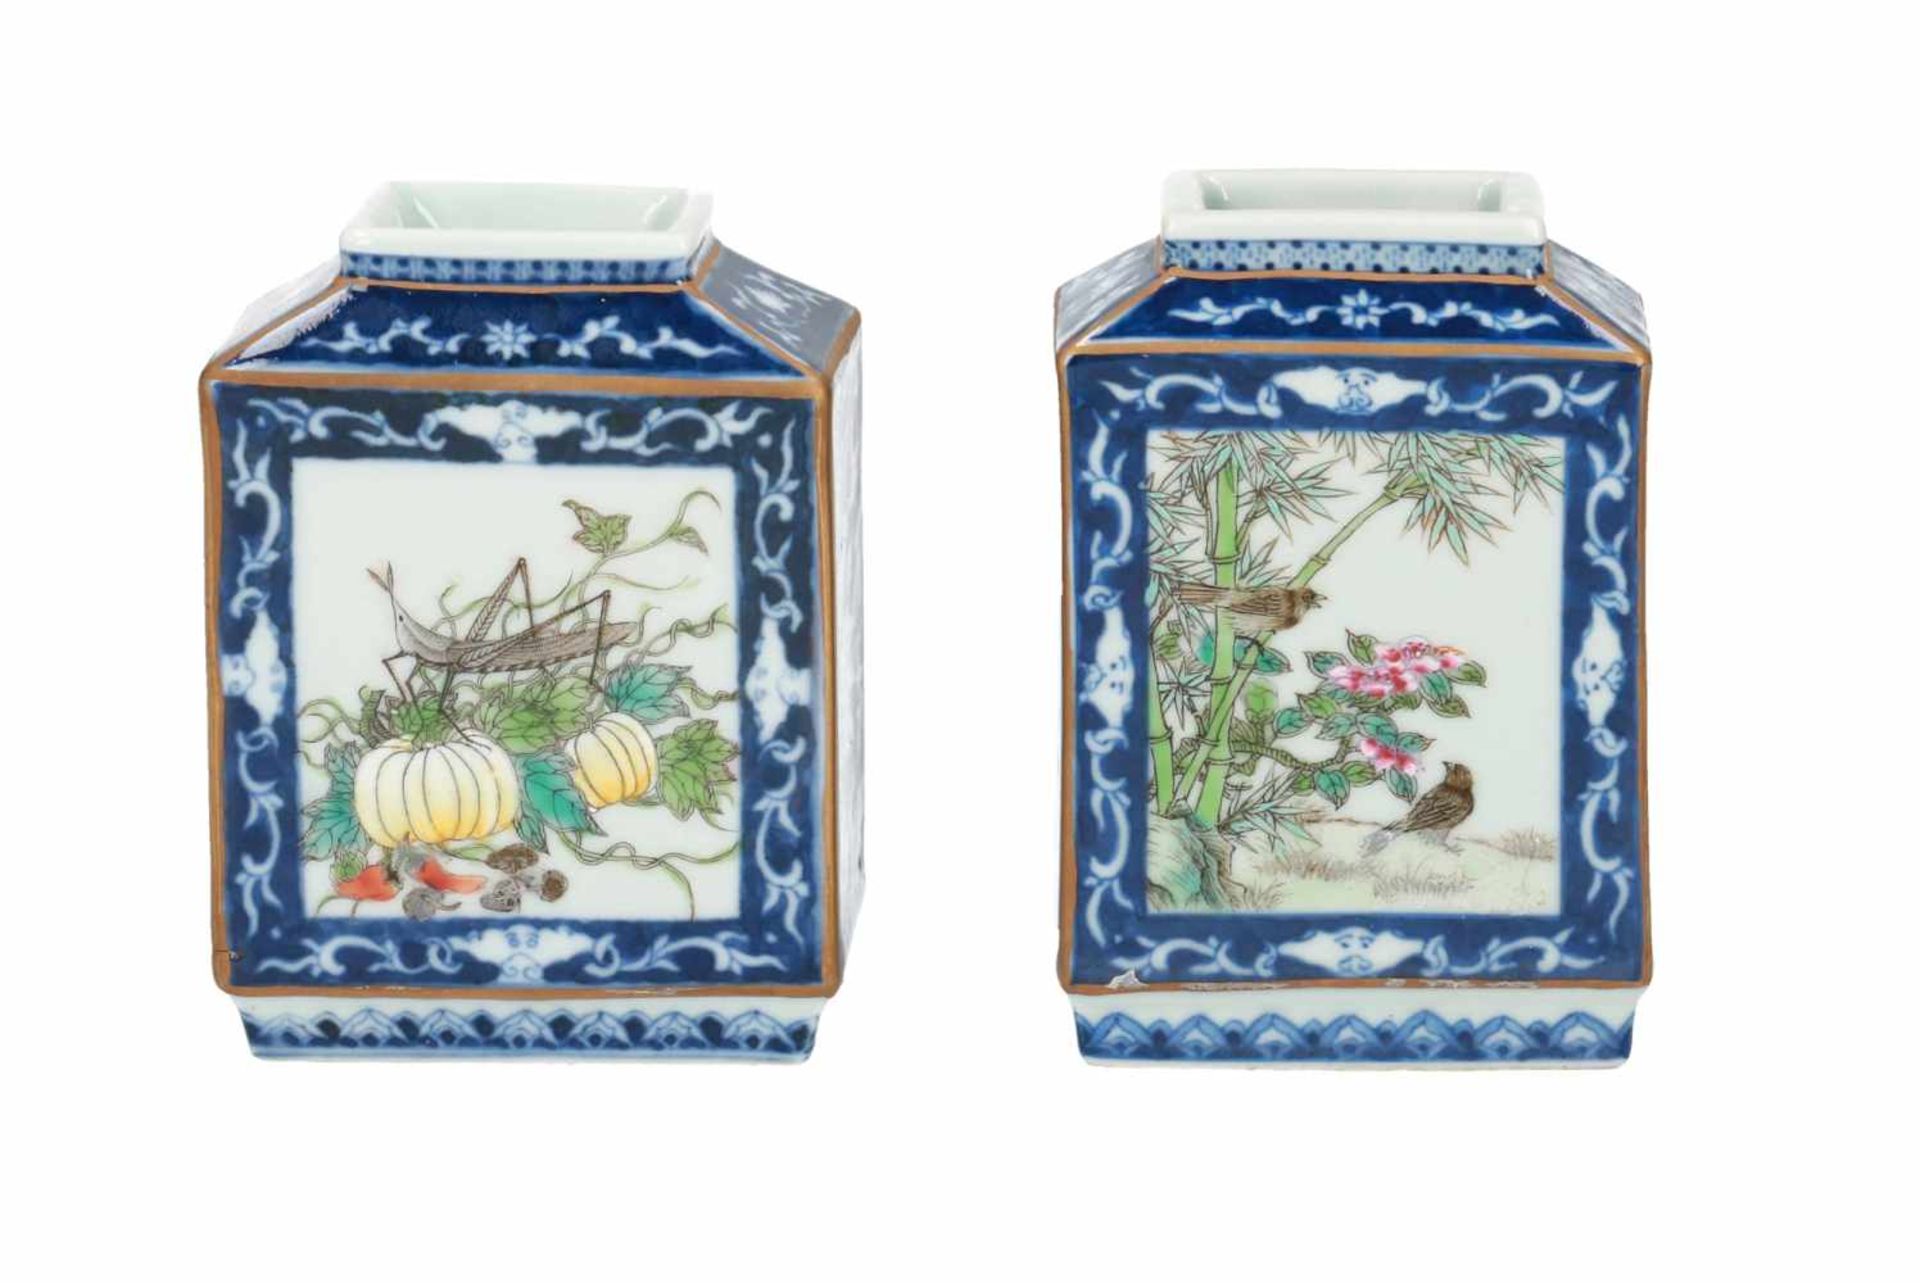 A pair of polychrome miniature vases decorated with flowers, birds and insects. Marked with